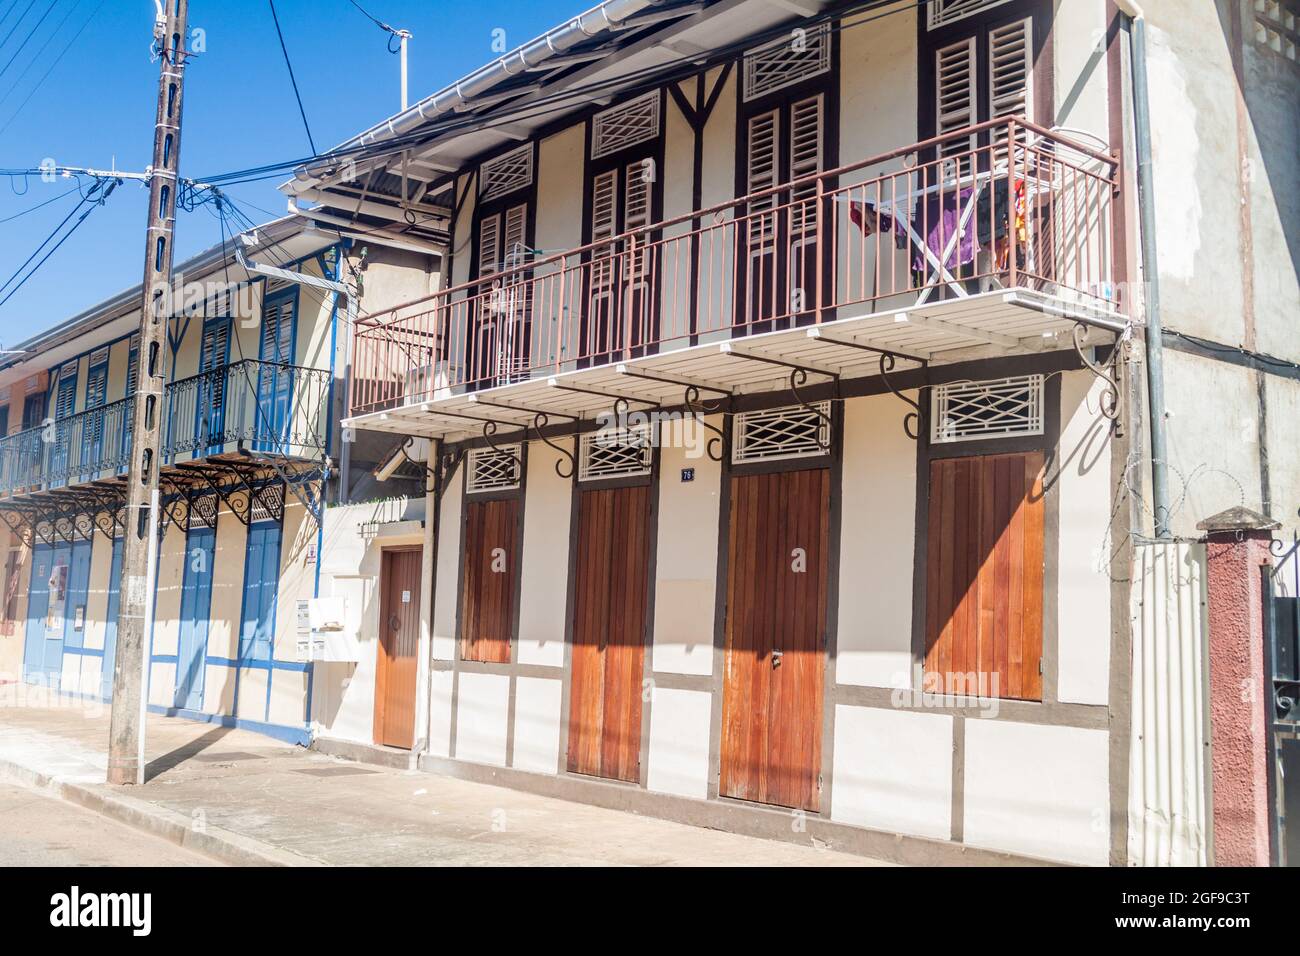 View of houses in the center of Cayenne, capital of French Guiana. Stock Photo